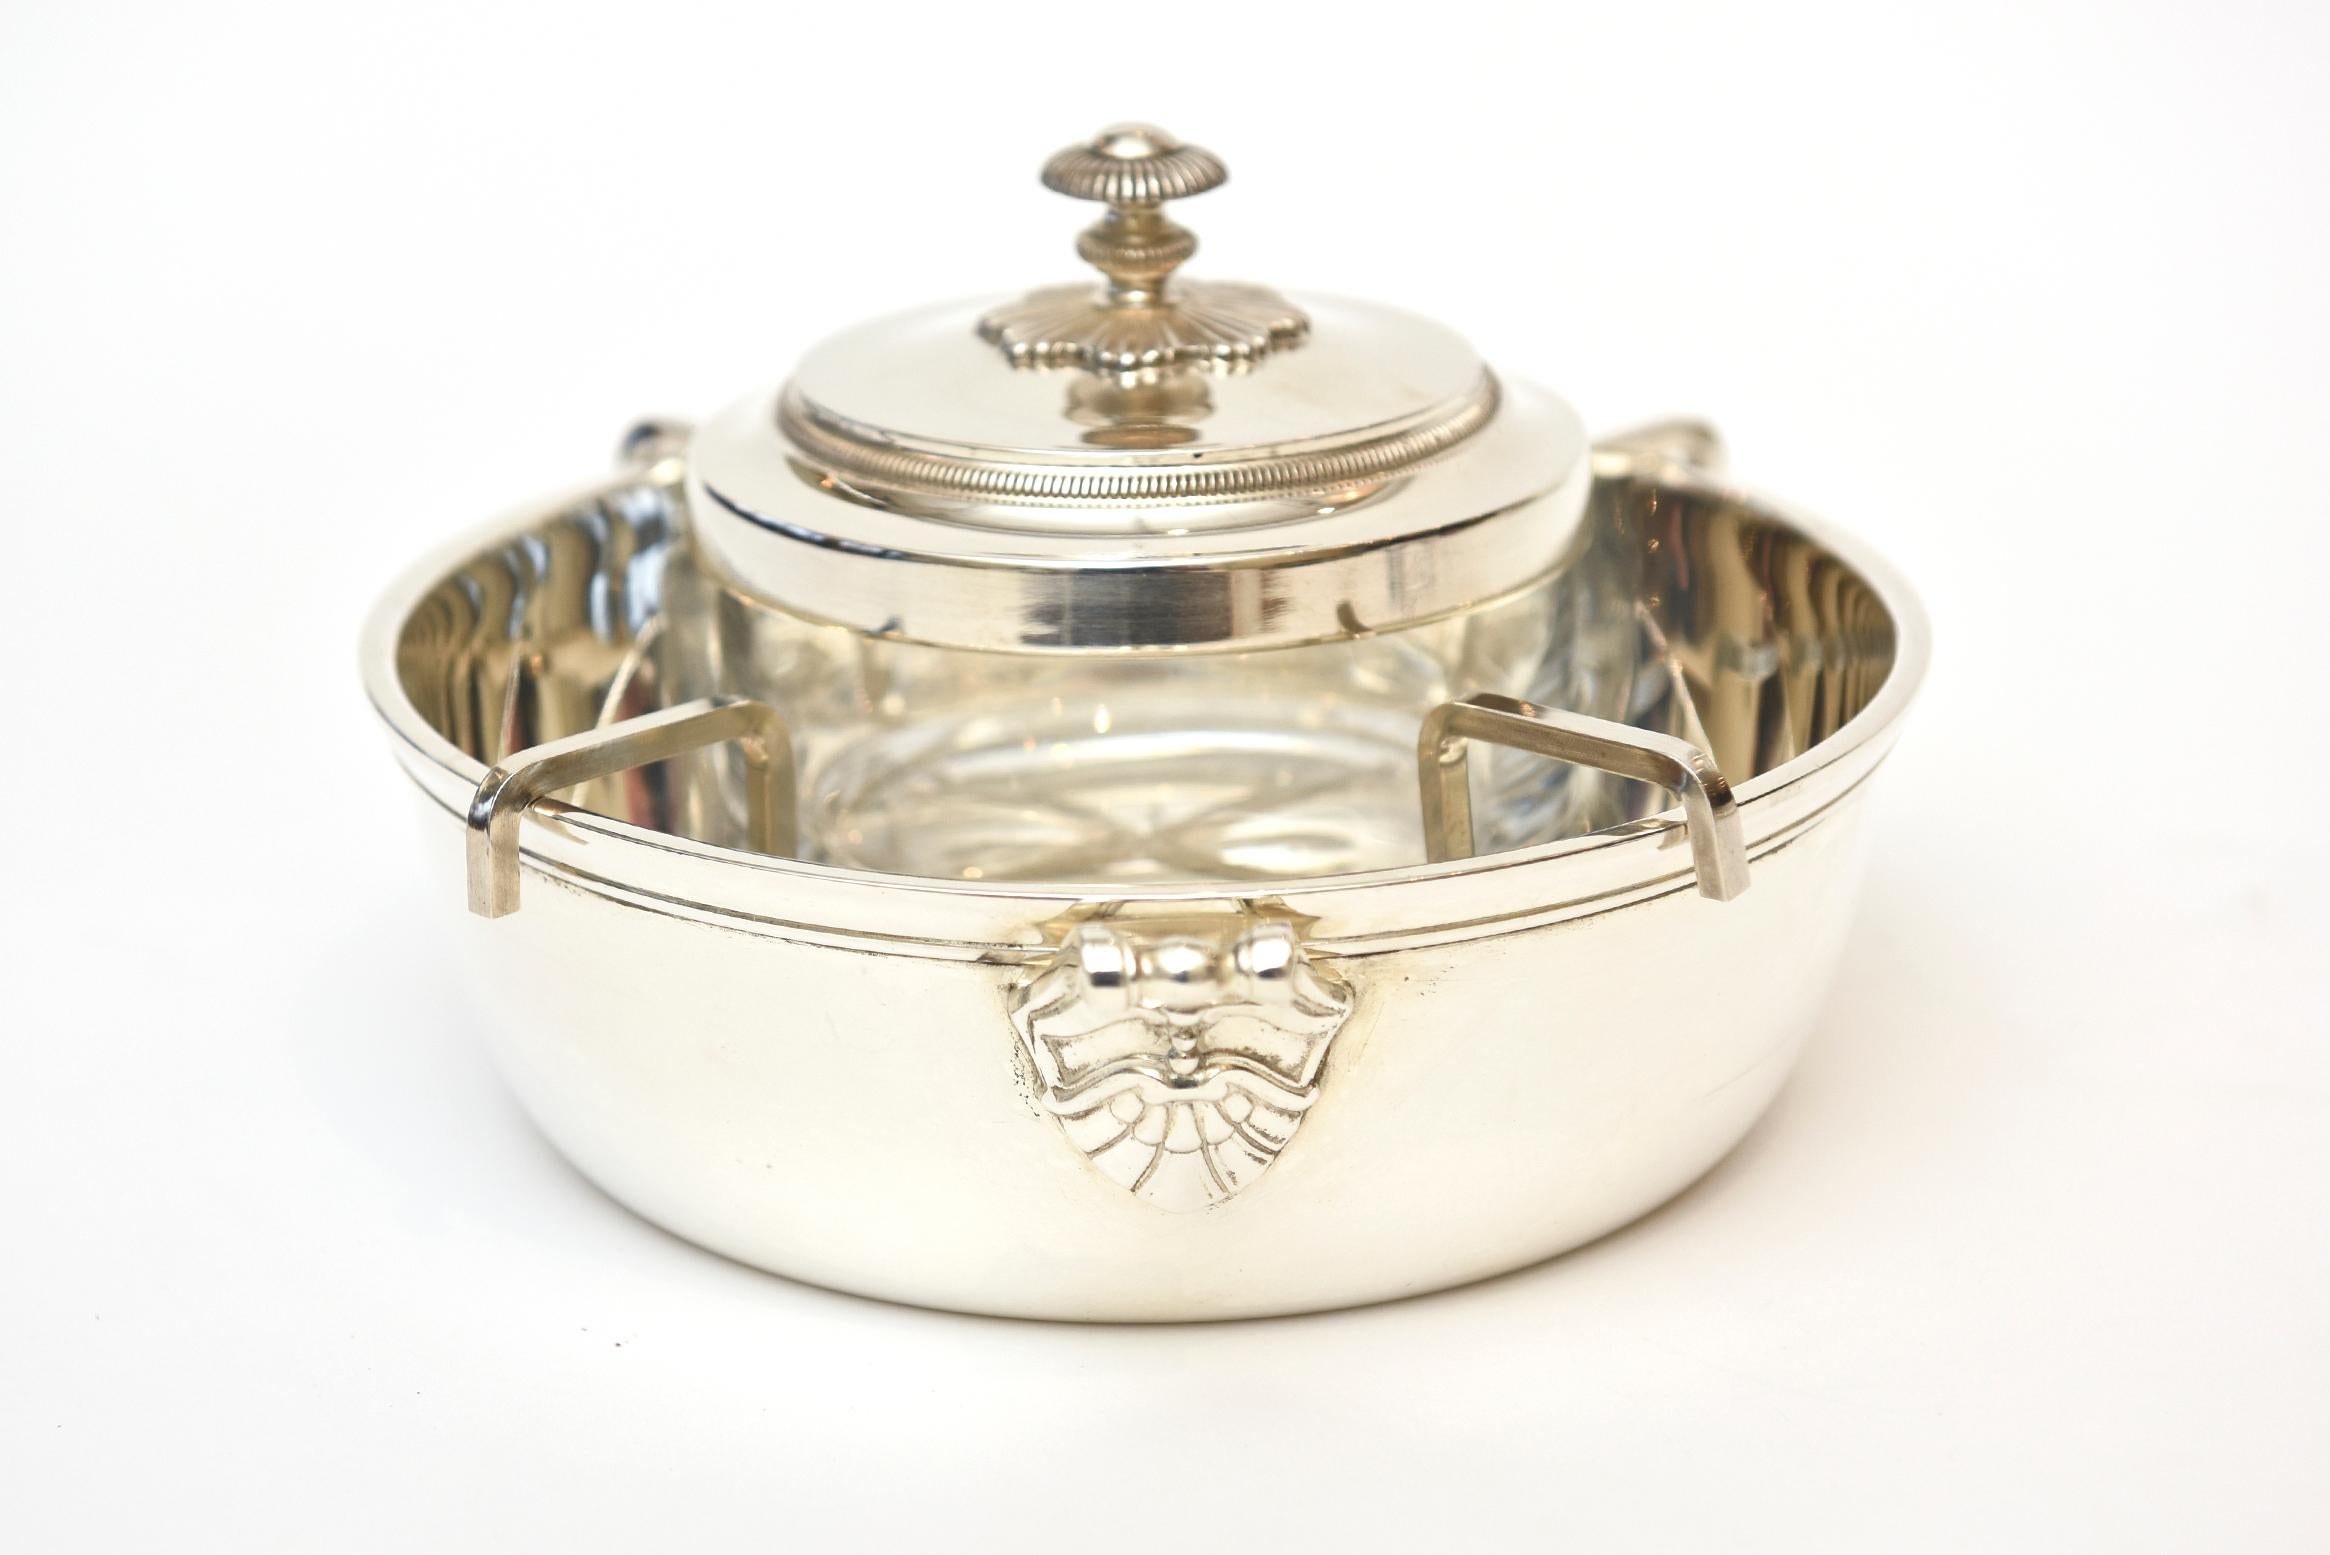 This lovely and substantial size vintage Christofle caviar serving bowl is silver plate with a glass insert. It has semi traditional patterns on it for a modern caviar bowl from the 1980s. It is elegant and refined and such a perfect caviar serving